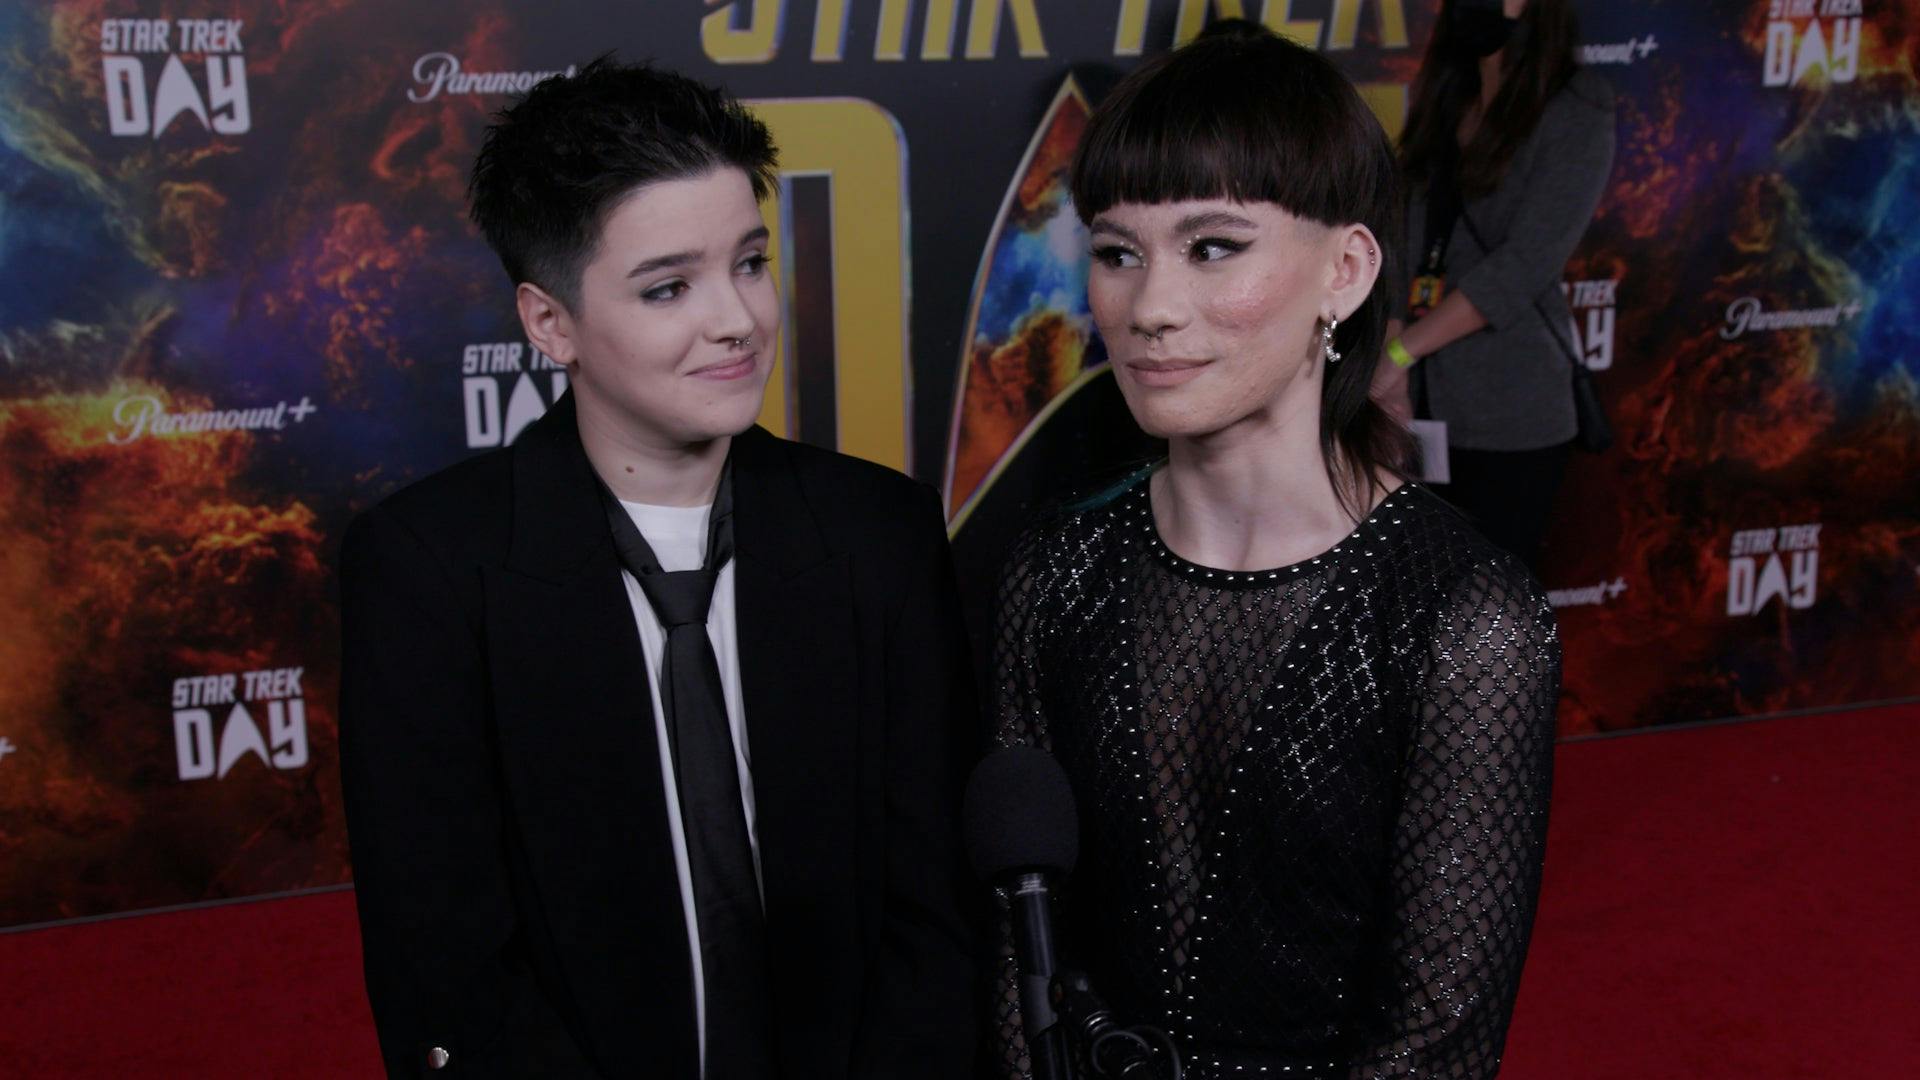 Blu Del Barrio and Ian Alexander on the red carpet for Star Trek Day 2021